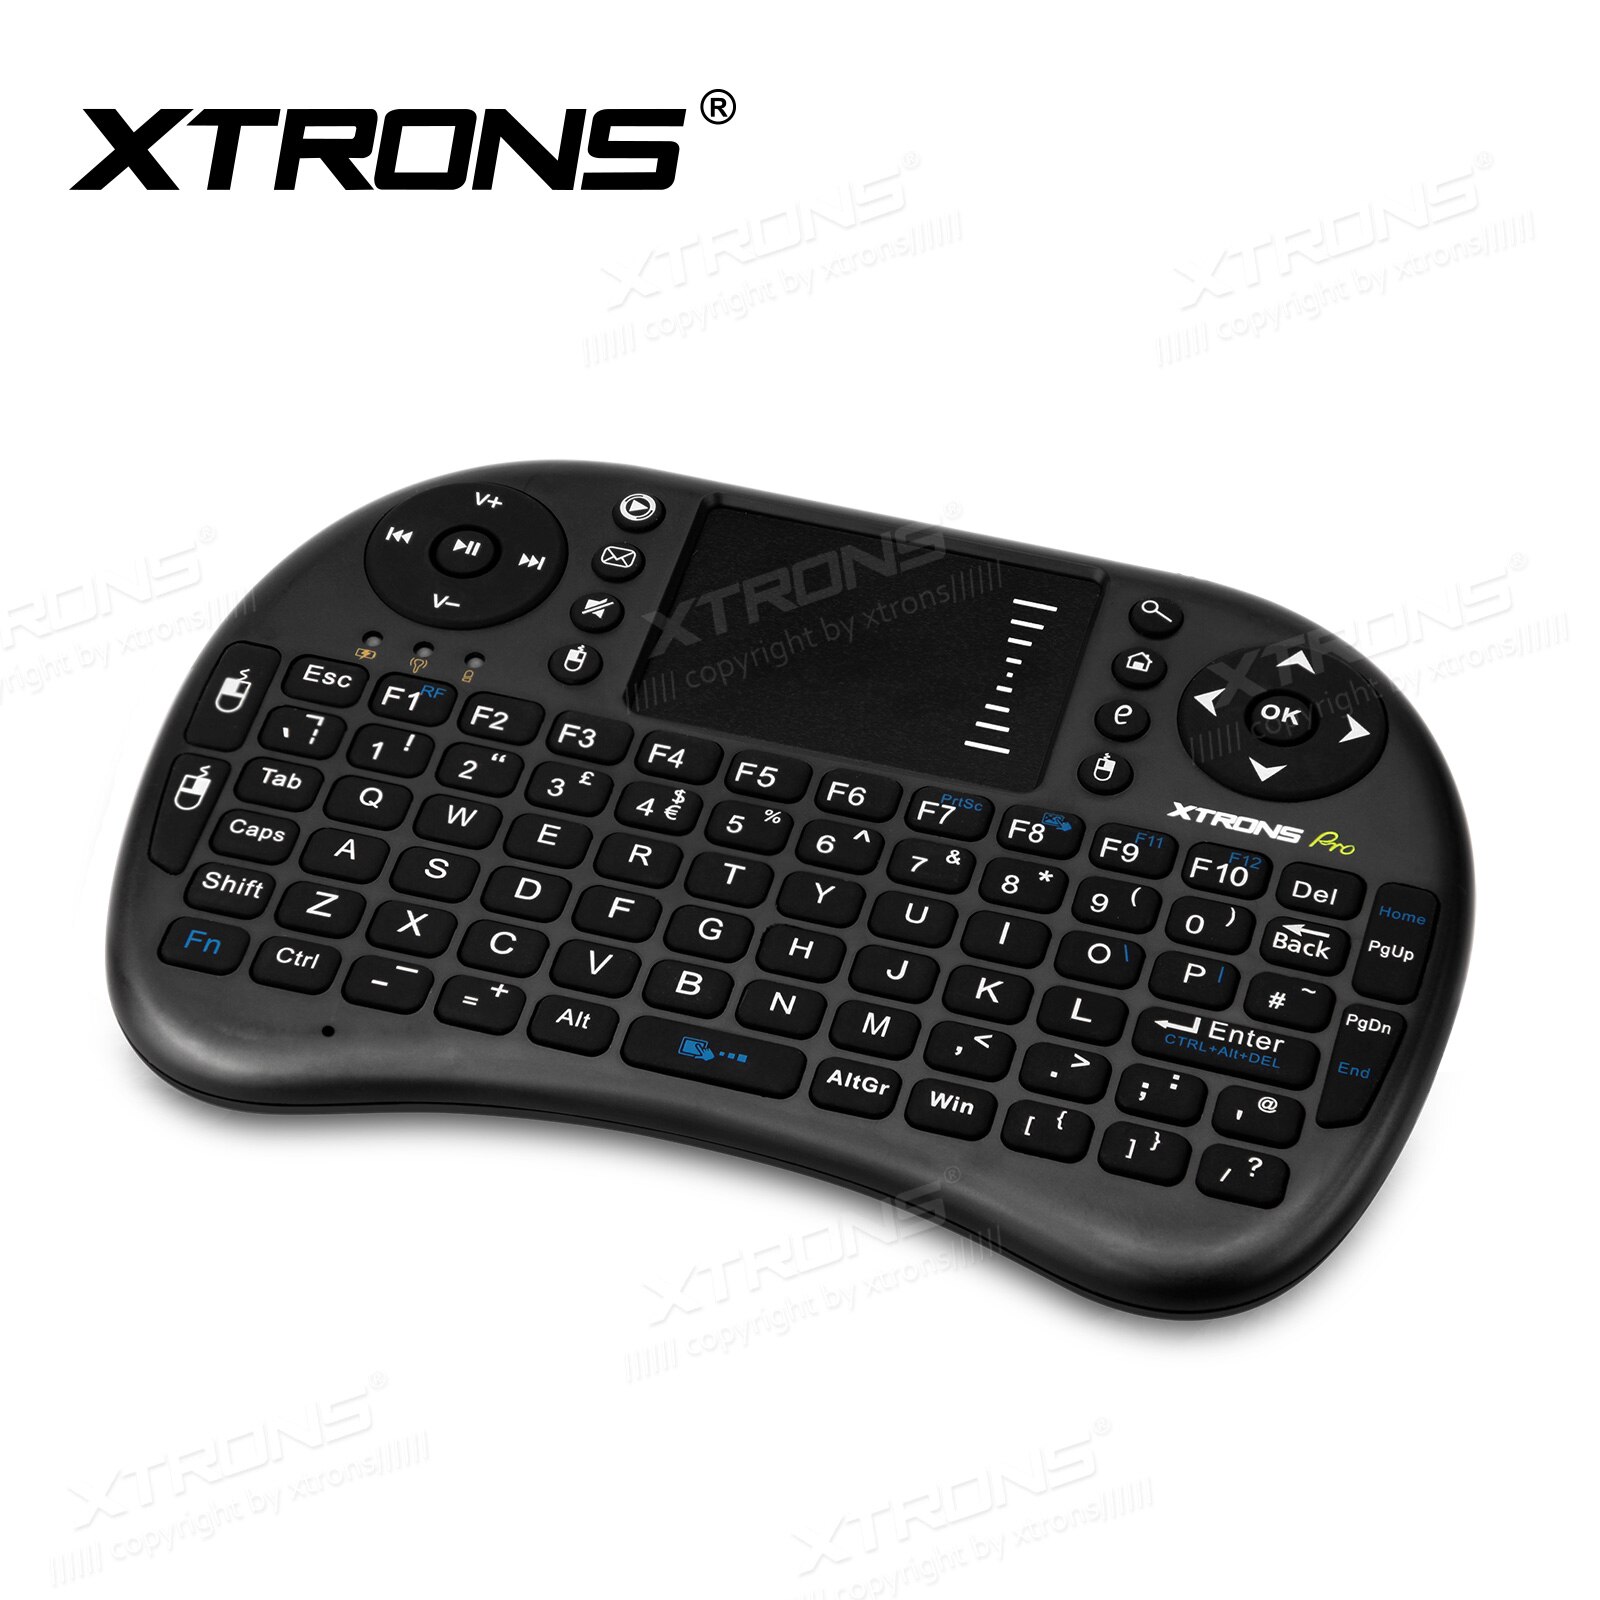 Xtrons AMK003 2.4Ghz Draadloze Mini Afstandsbediening Toetsenbord Muis Touchpad Voor Car Pc Pad Laptop Xbox, 360 PS3 Tv Box